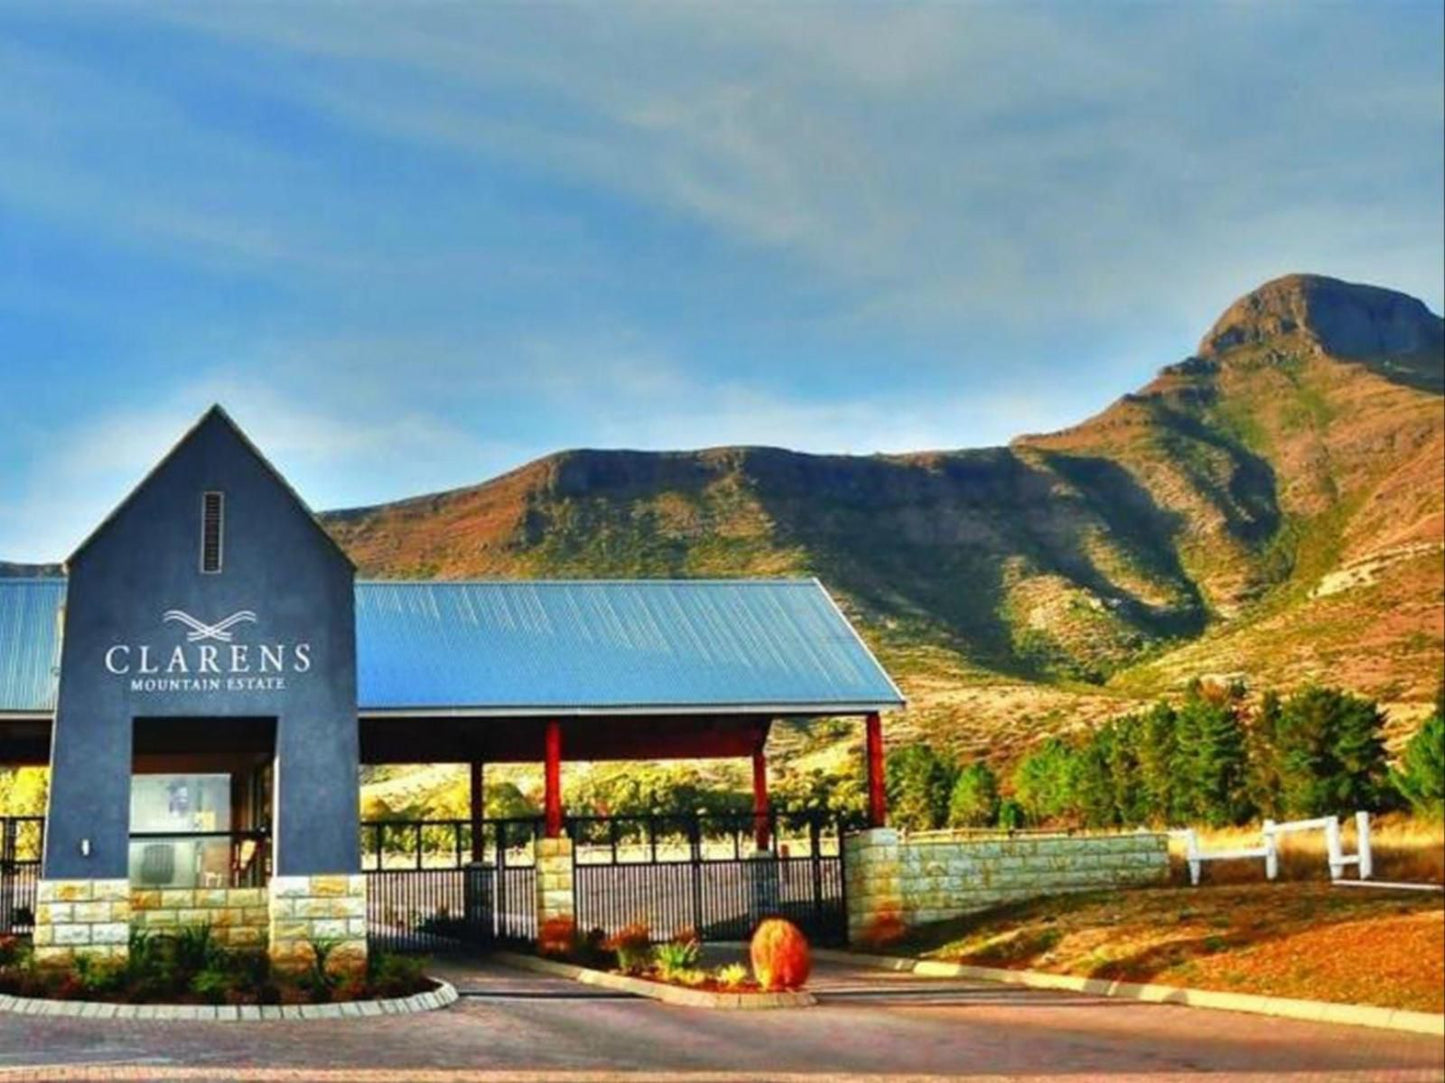 Cute And Quirky Clarens Clarens Golf And Trout Estate Clarens Free State South Africa Complementary Colors, Highland, Nature